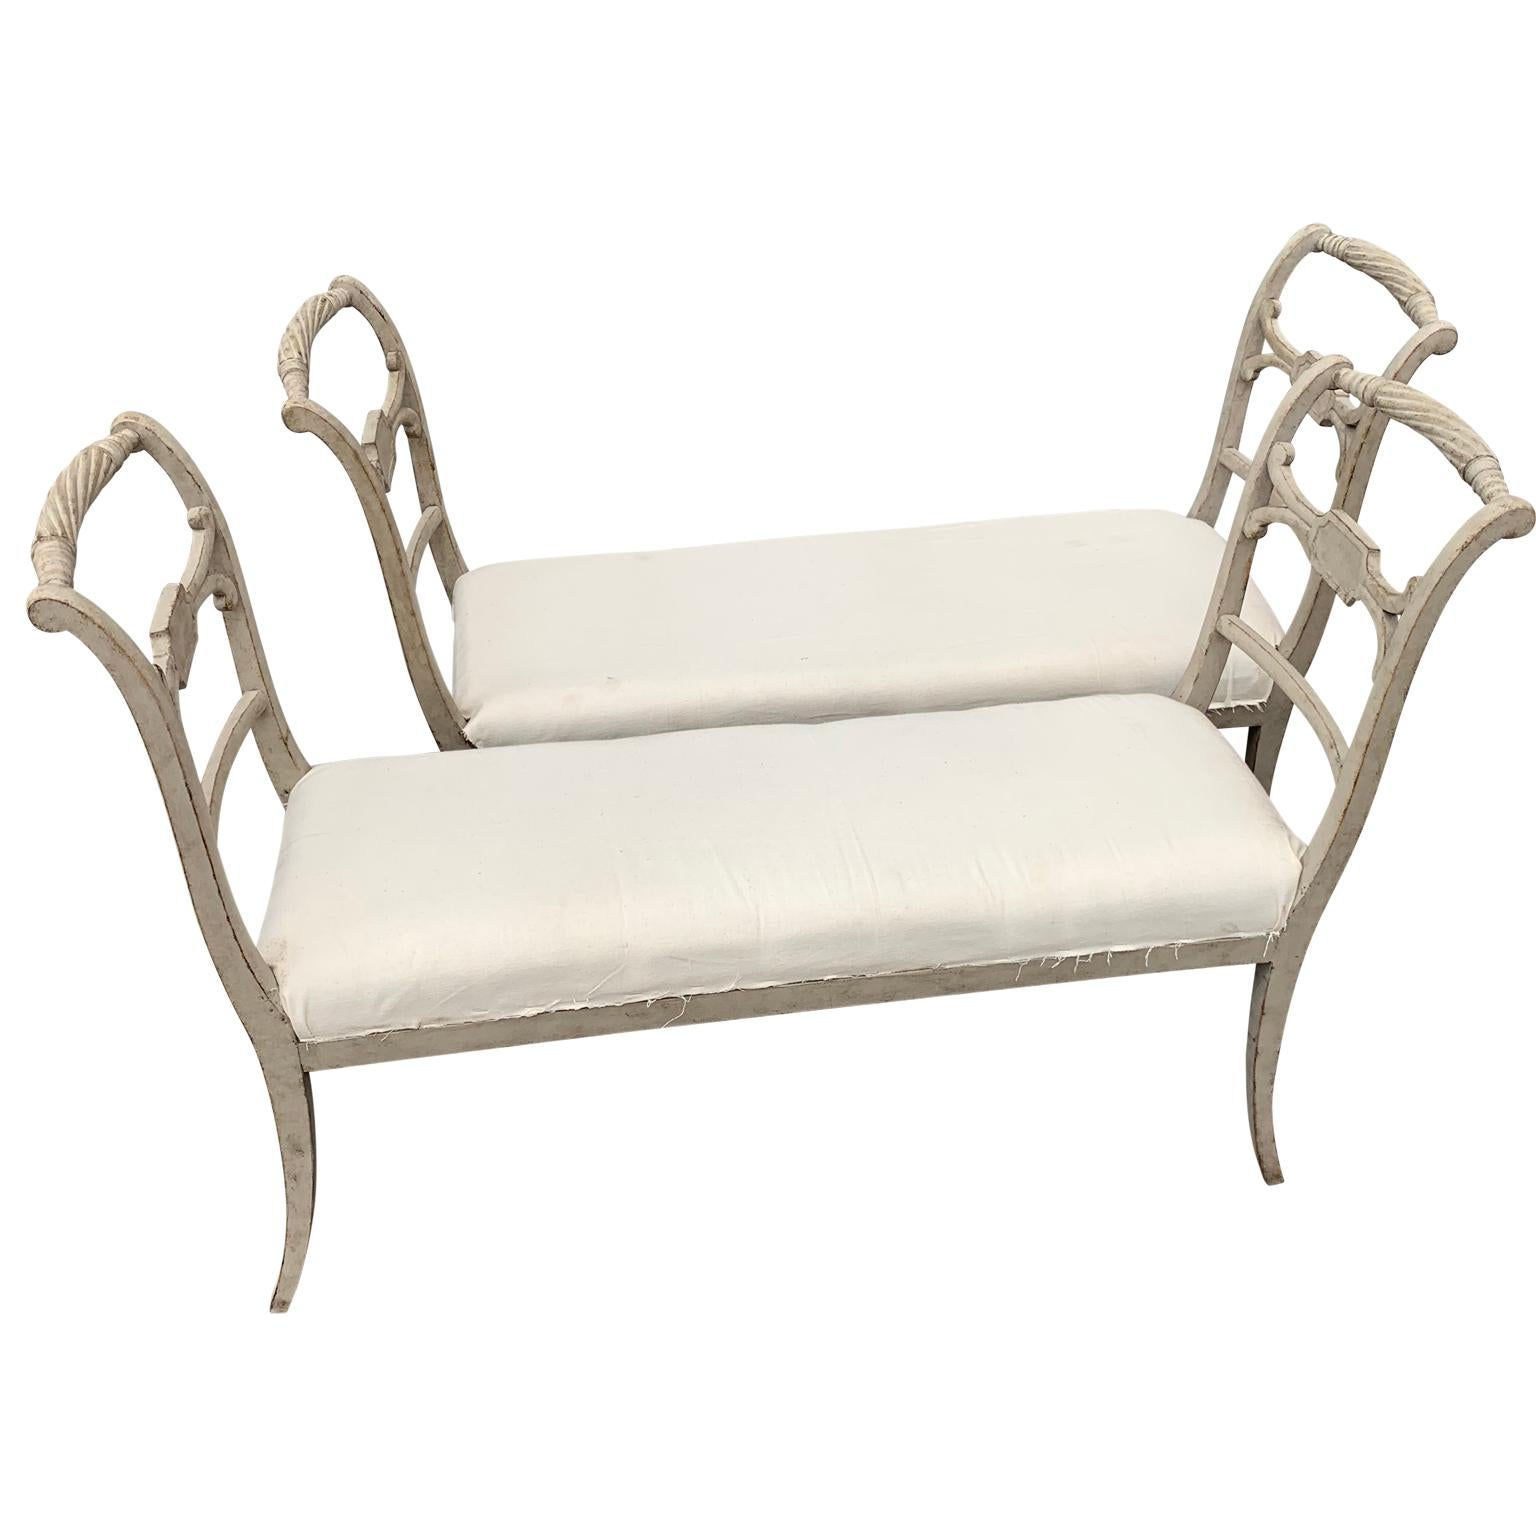 Pair of Swedish Gustavian Style Grey Painted Benches or Settees In Good Condition For Sale In Haddonfield, NJ